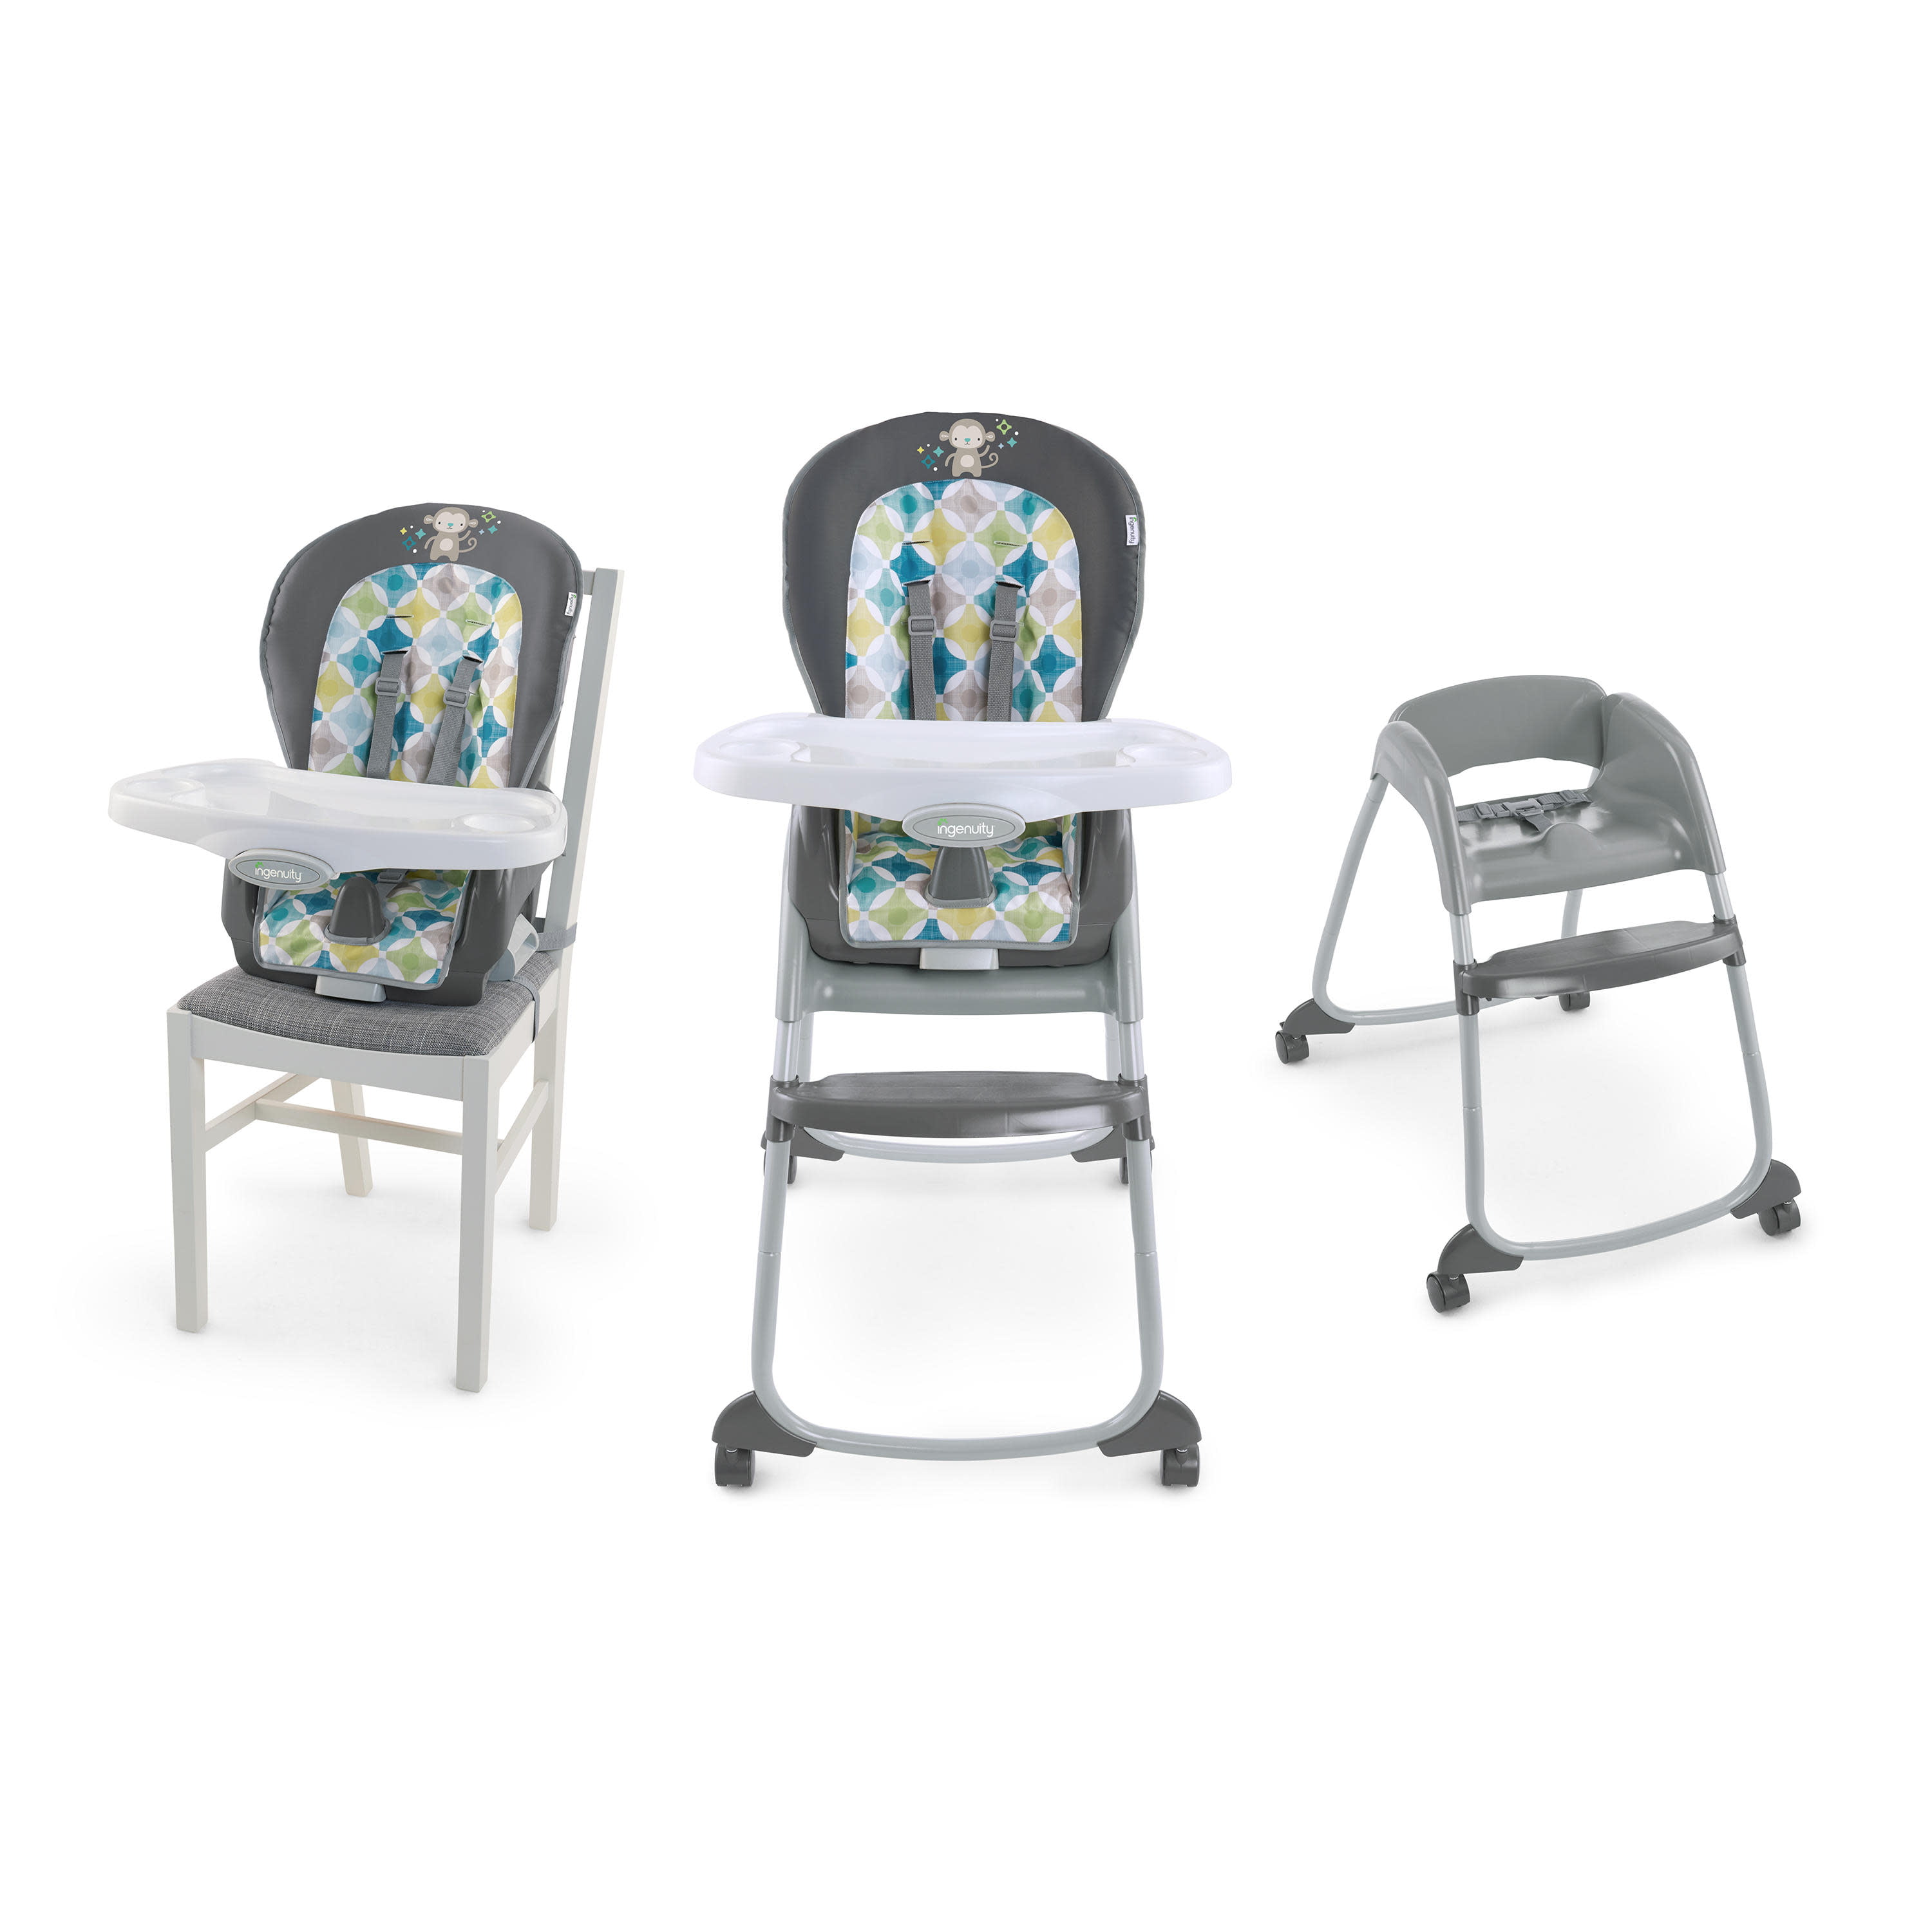 Ingenuity Trio 3 In 1 High Chair Moreland